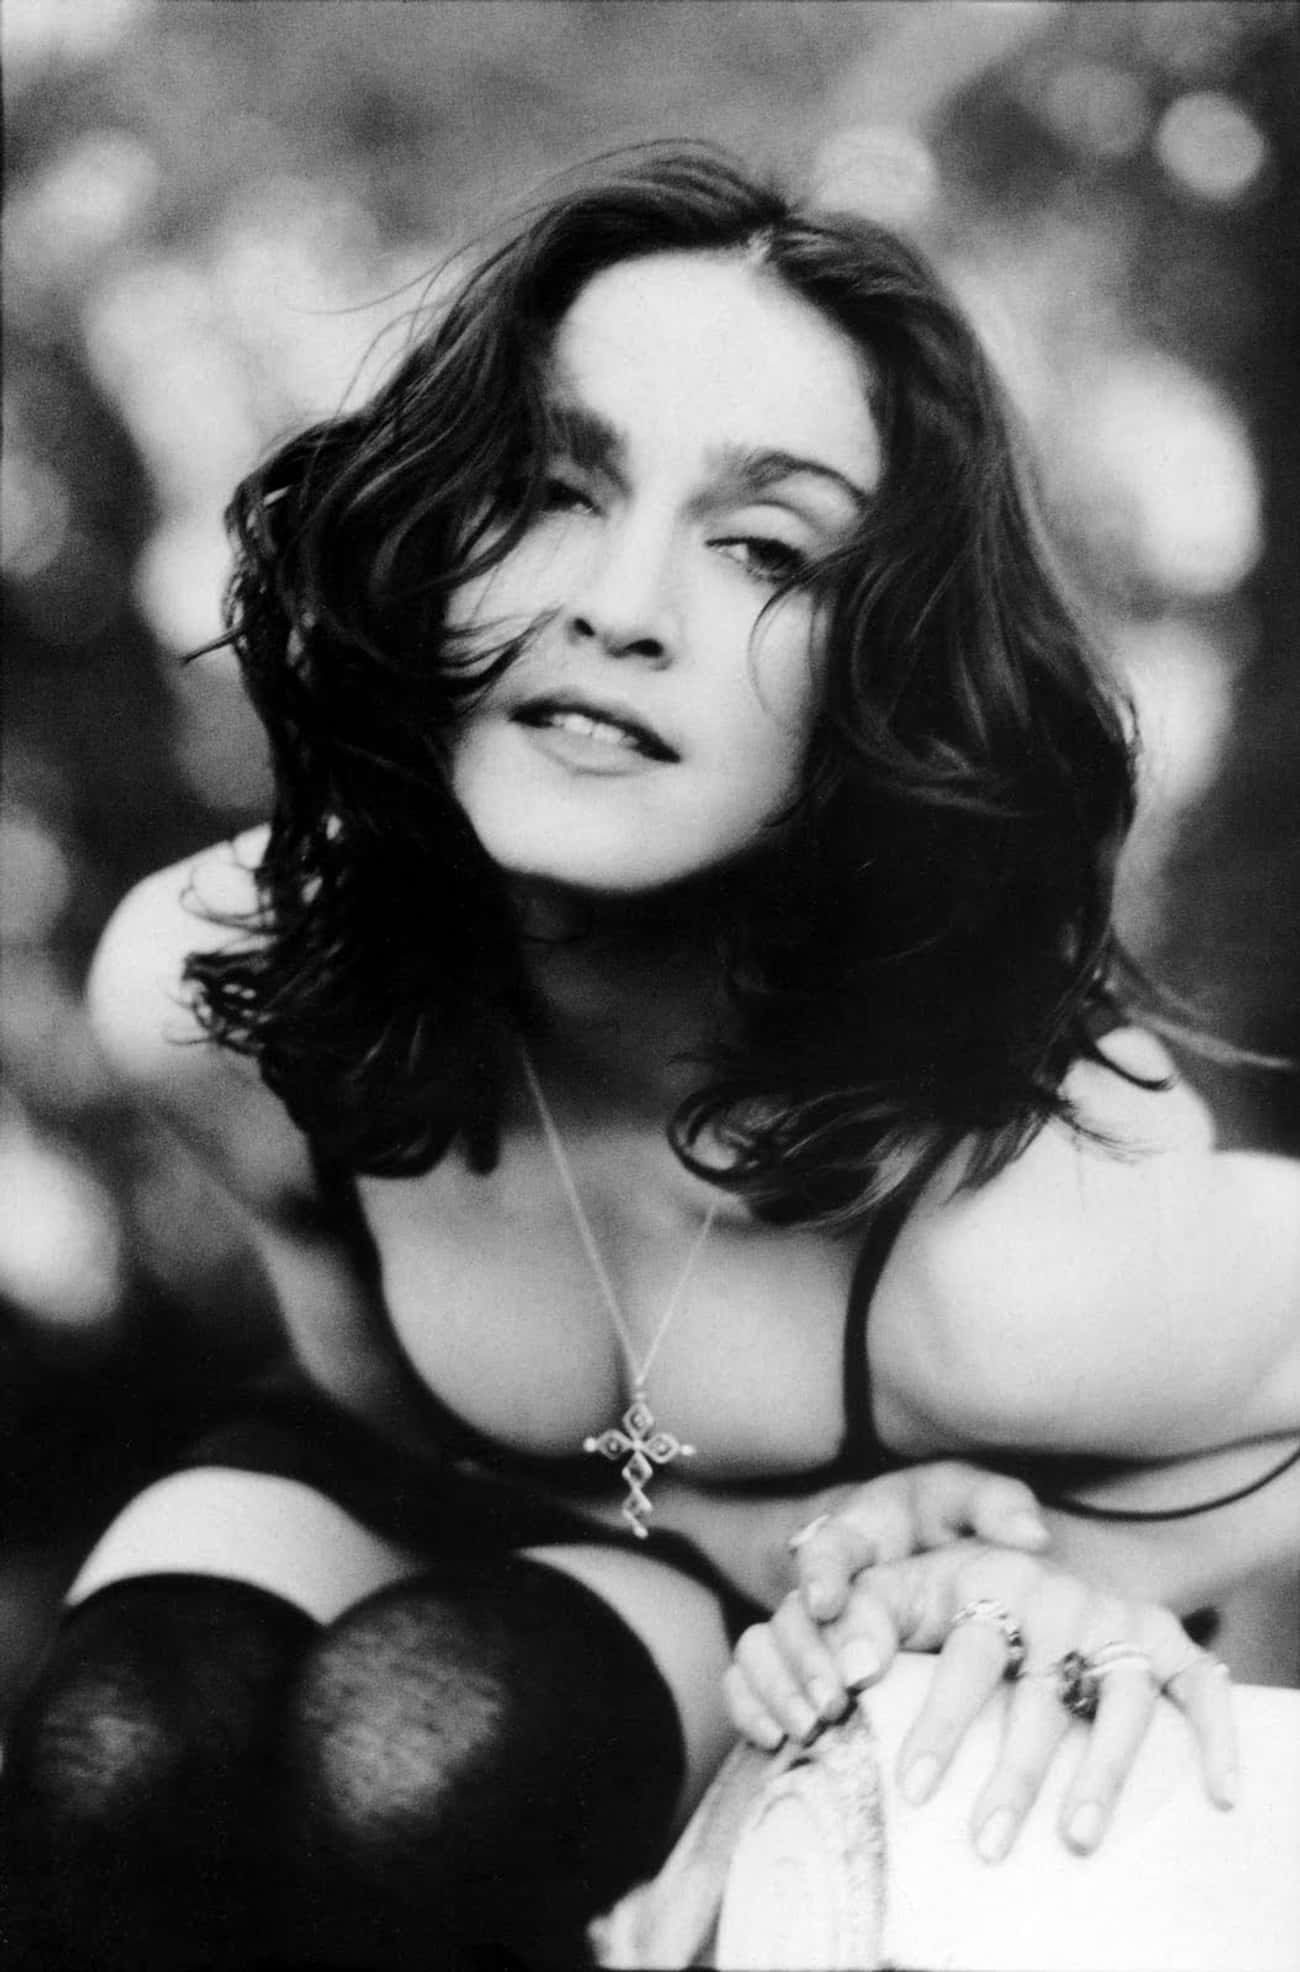 Young Madonna Leaning In